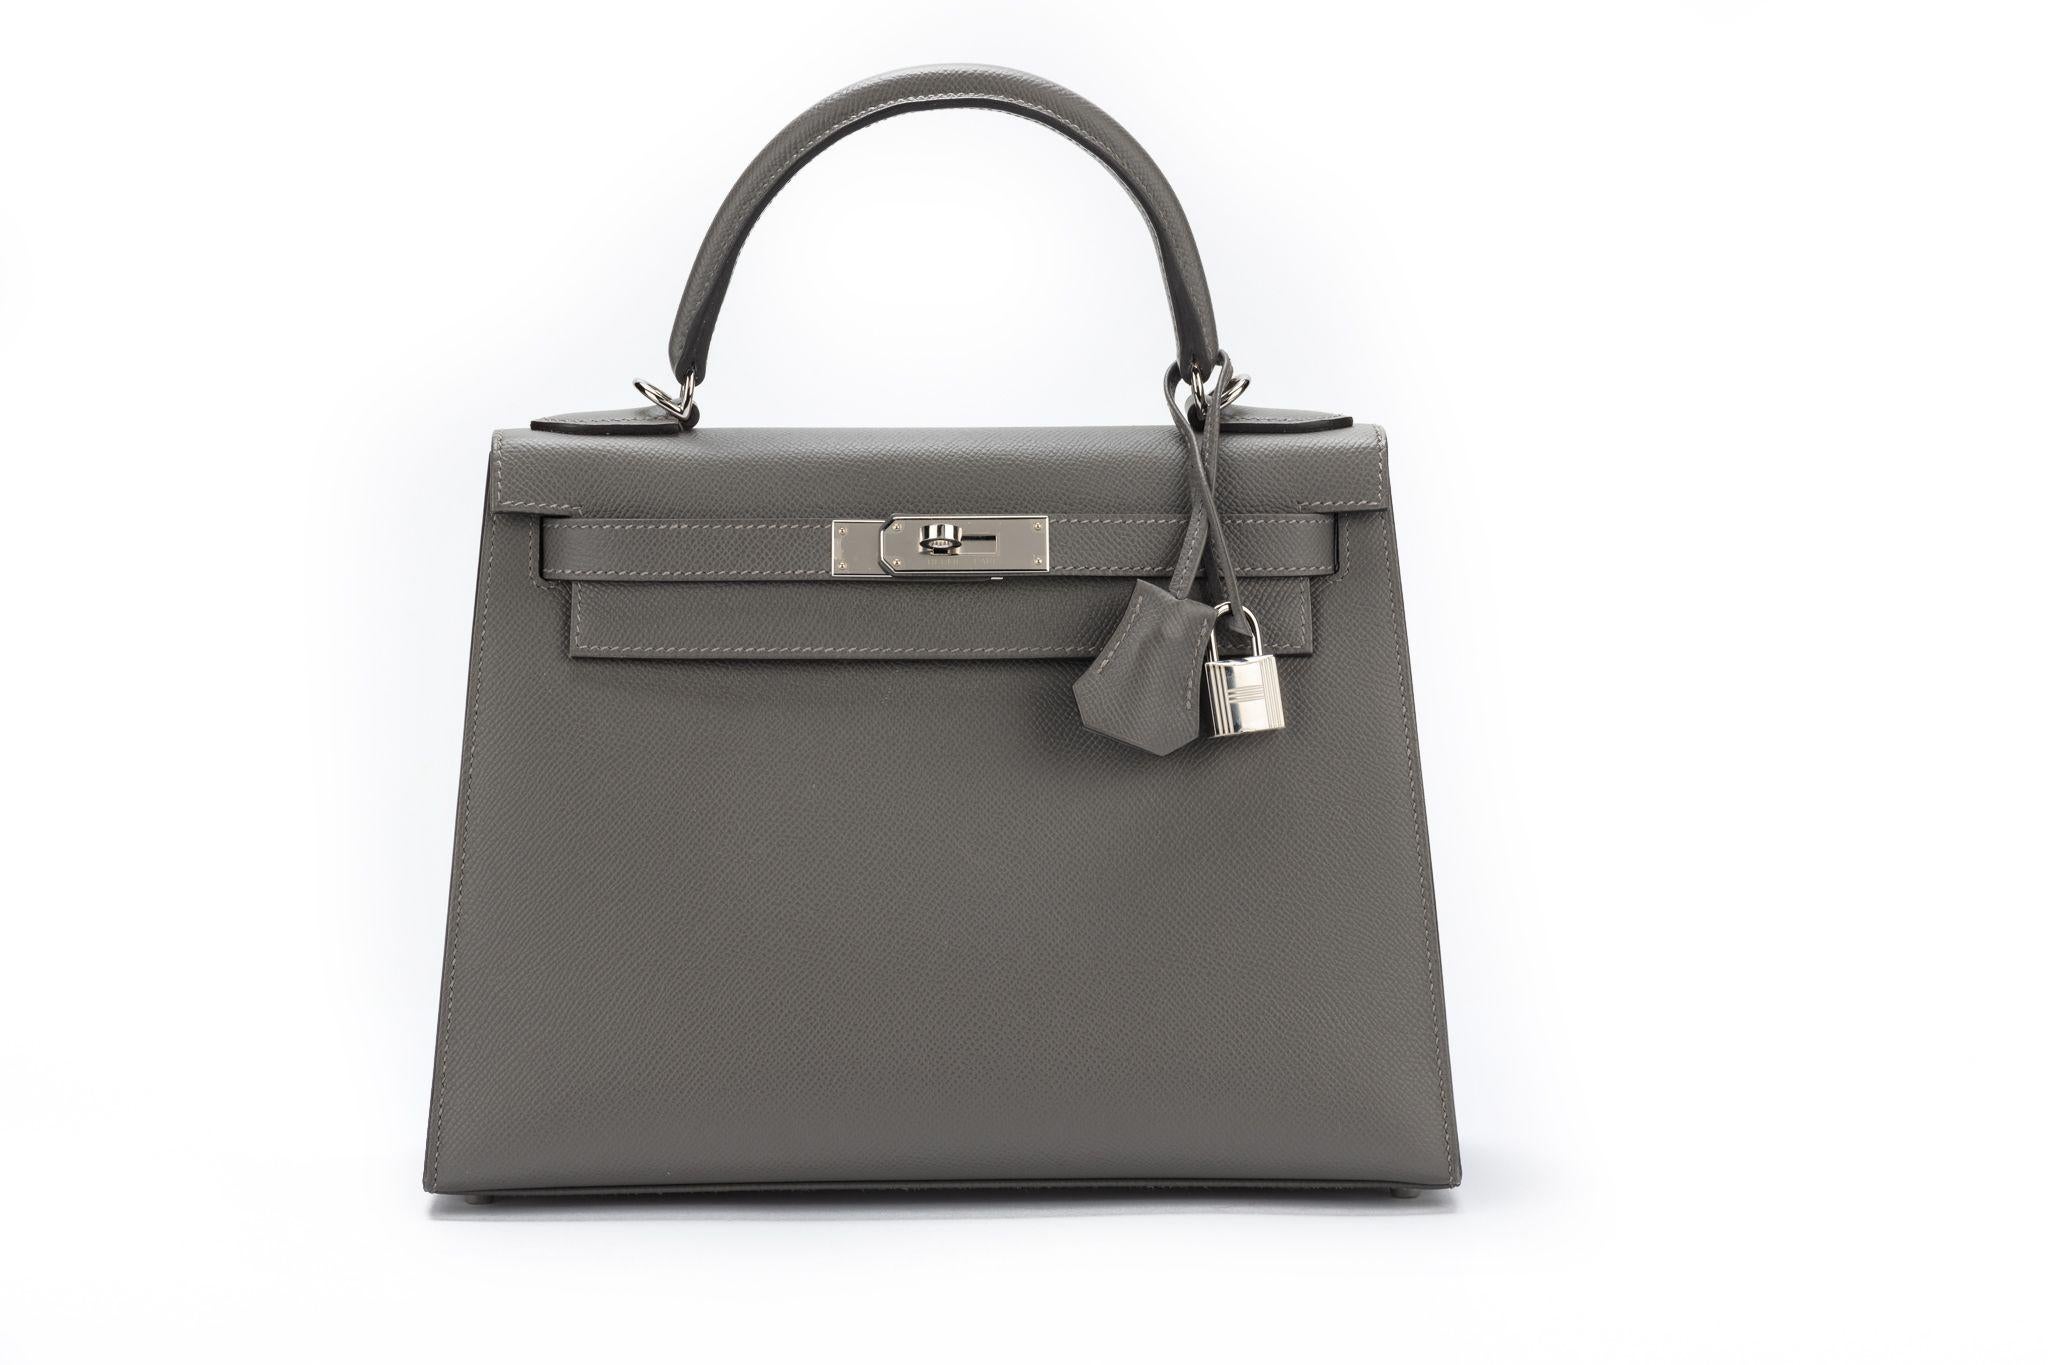 Hermes brand new Kelly 28 in Gris Mouette epsom leather with brushed palladium hardware and tonal stitching. It comes with a two strap with front toggle closure, clochette with lock and two keys, single rolled handle and removable shoulder strap.